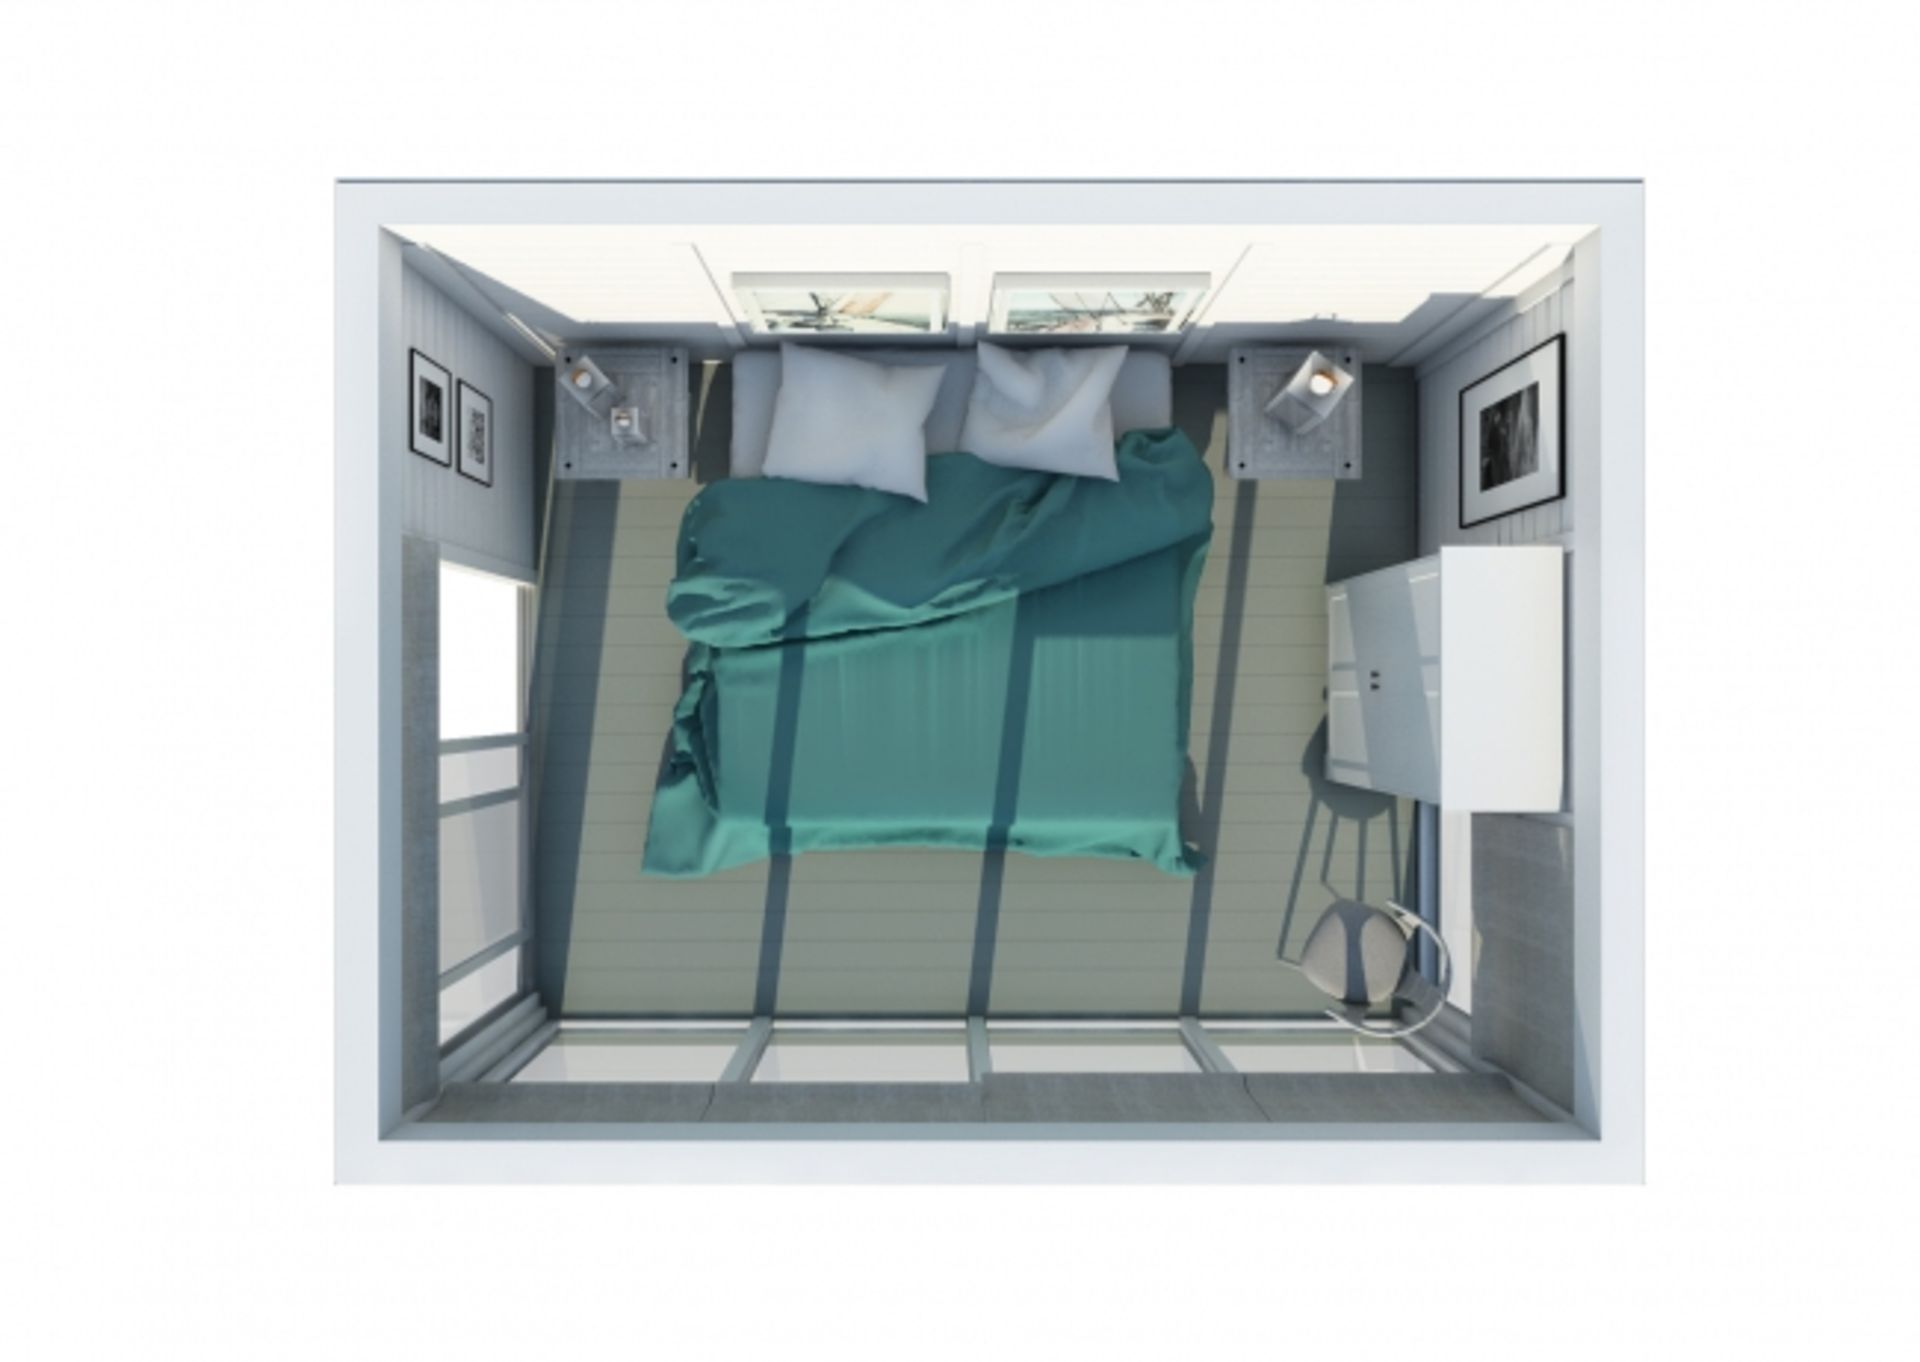 + VAT Brand New Insulated Cube Hotel Room Cabin - 3 x 4m - Insulated Walls + Glass Sliding Doors - - Image 4 of 4